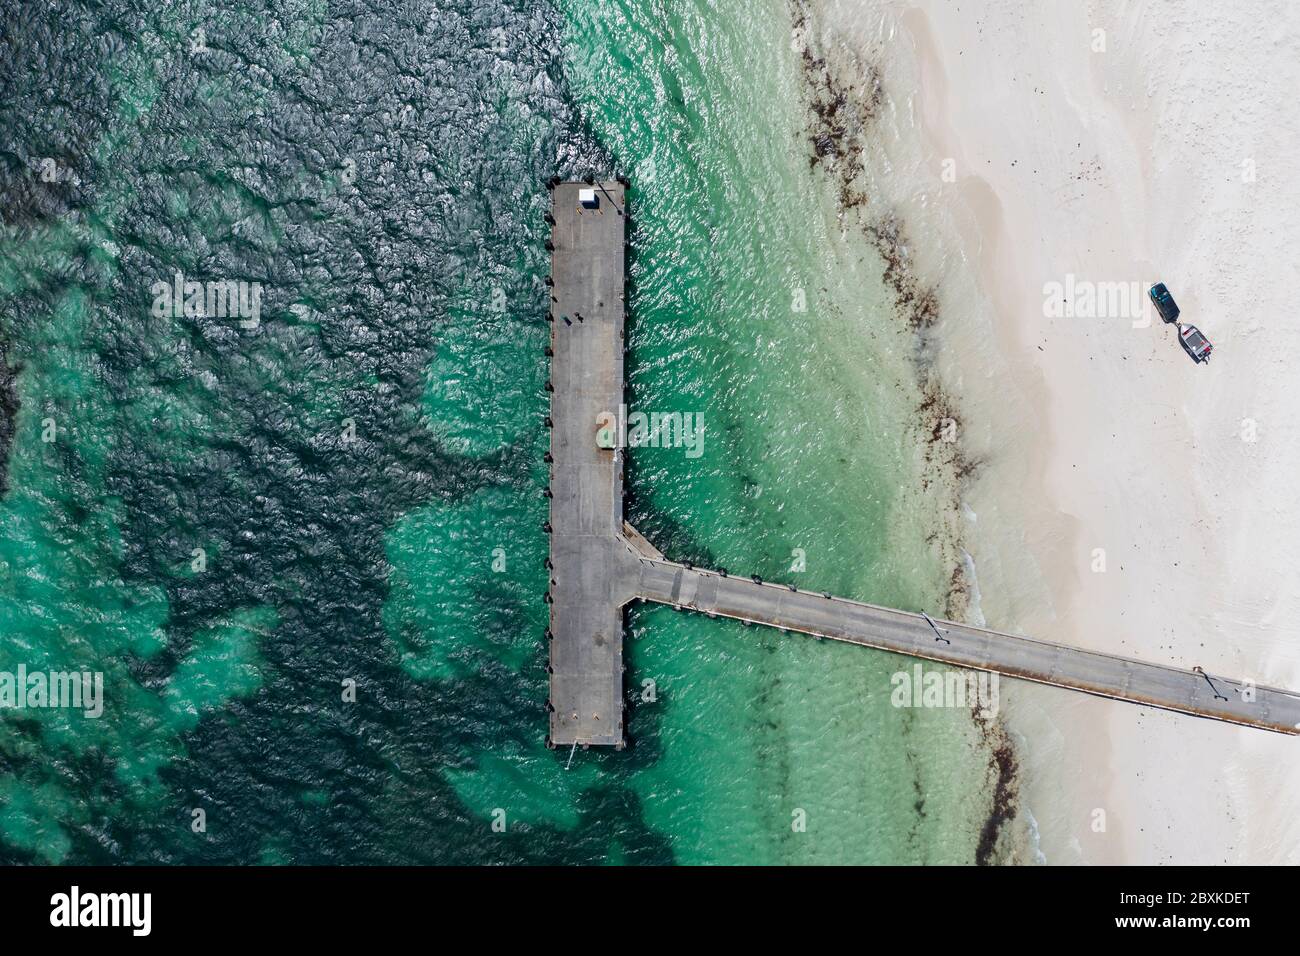 Aerial overhead view of the jetty at Lancelin in Western Australia; a car pulling a boat prepares to launch into the ocean Stock Photo